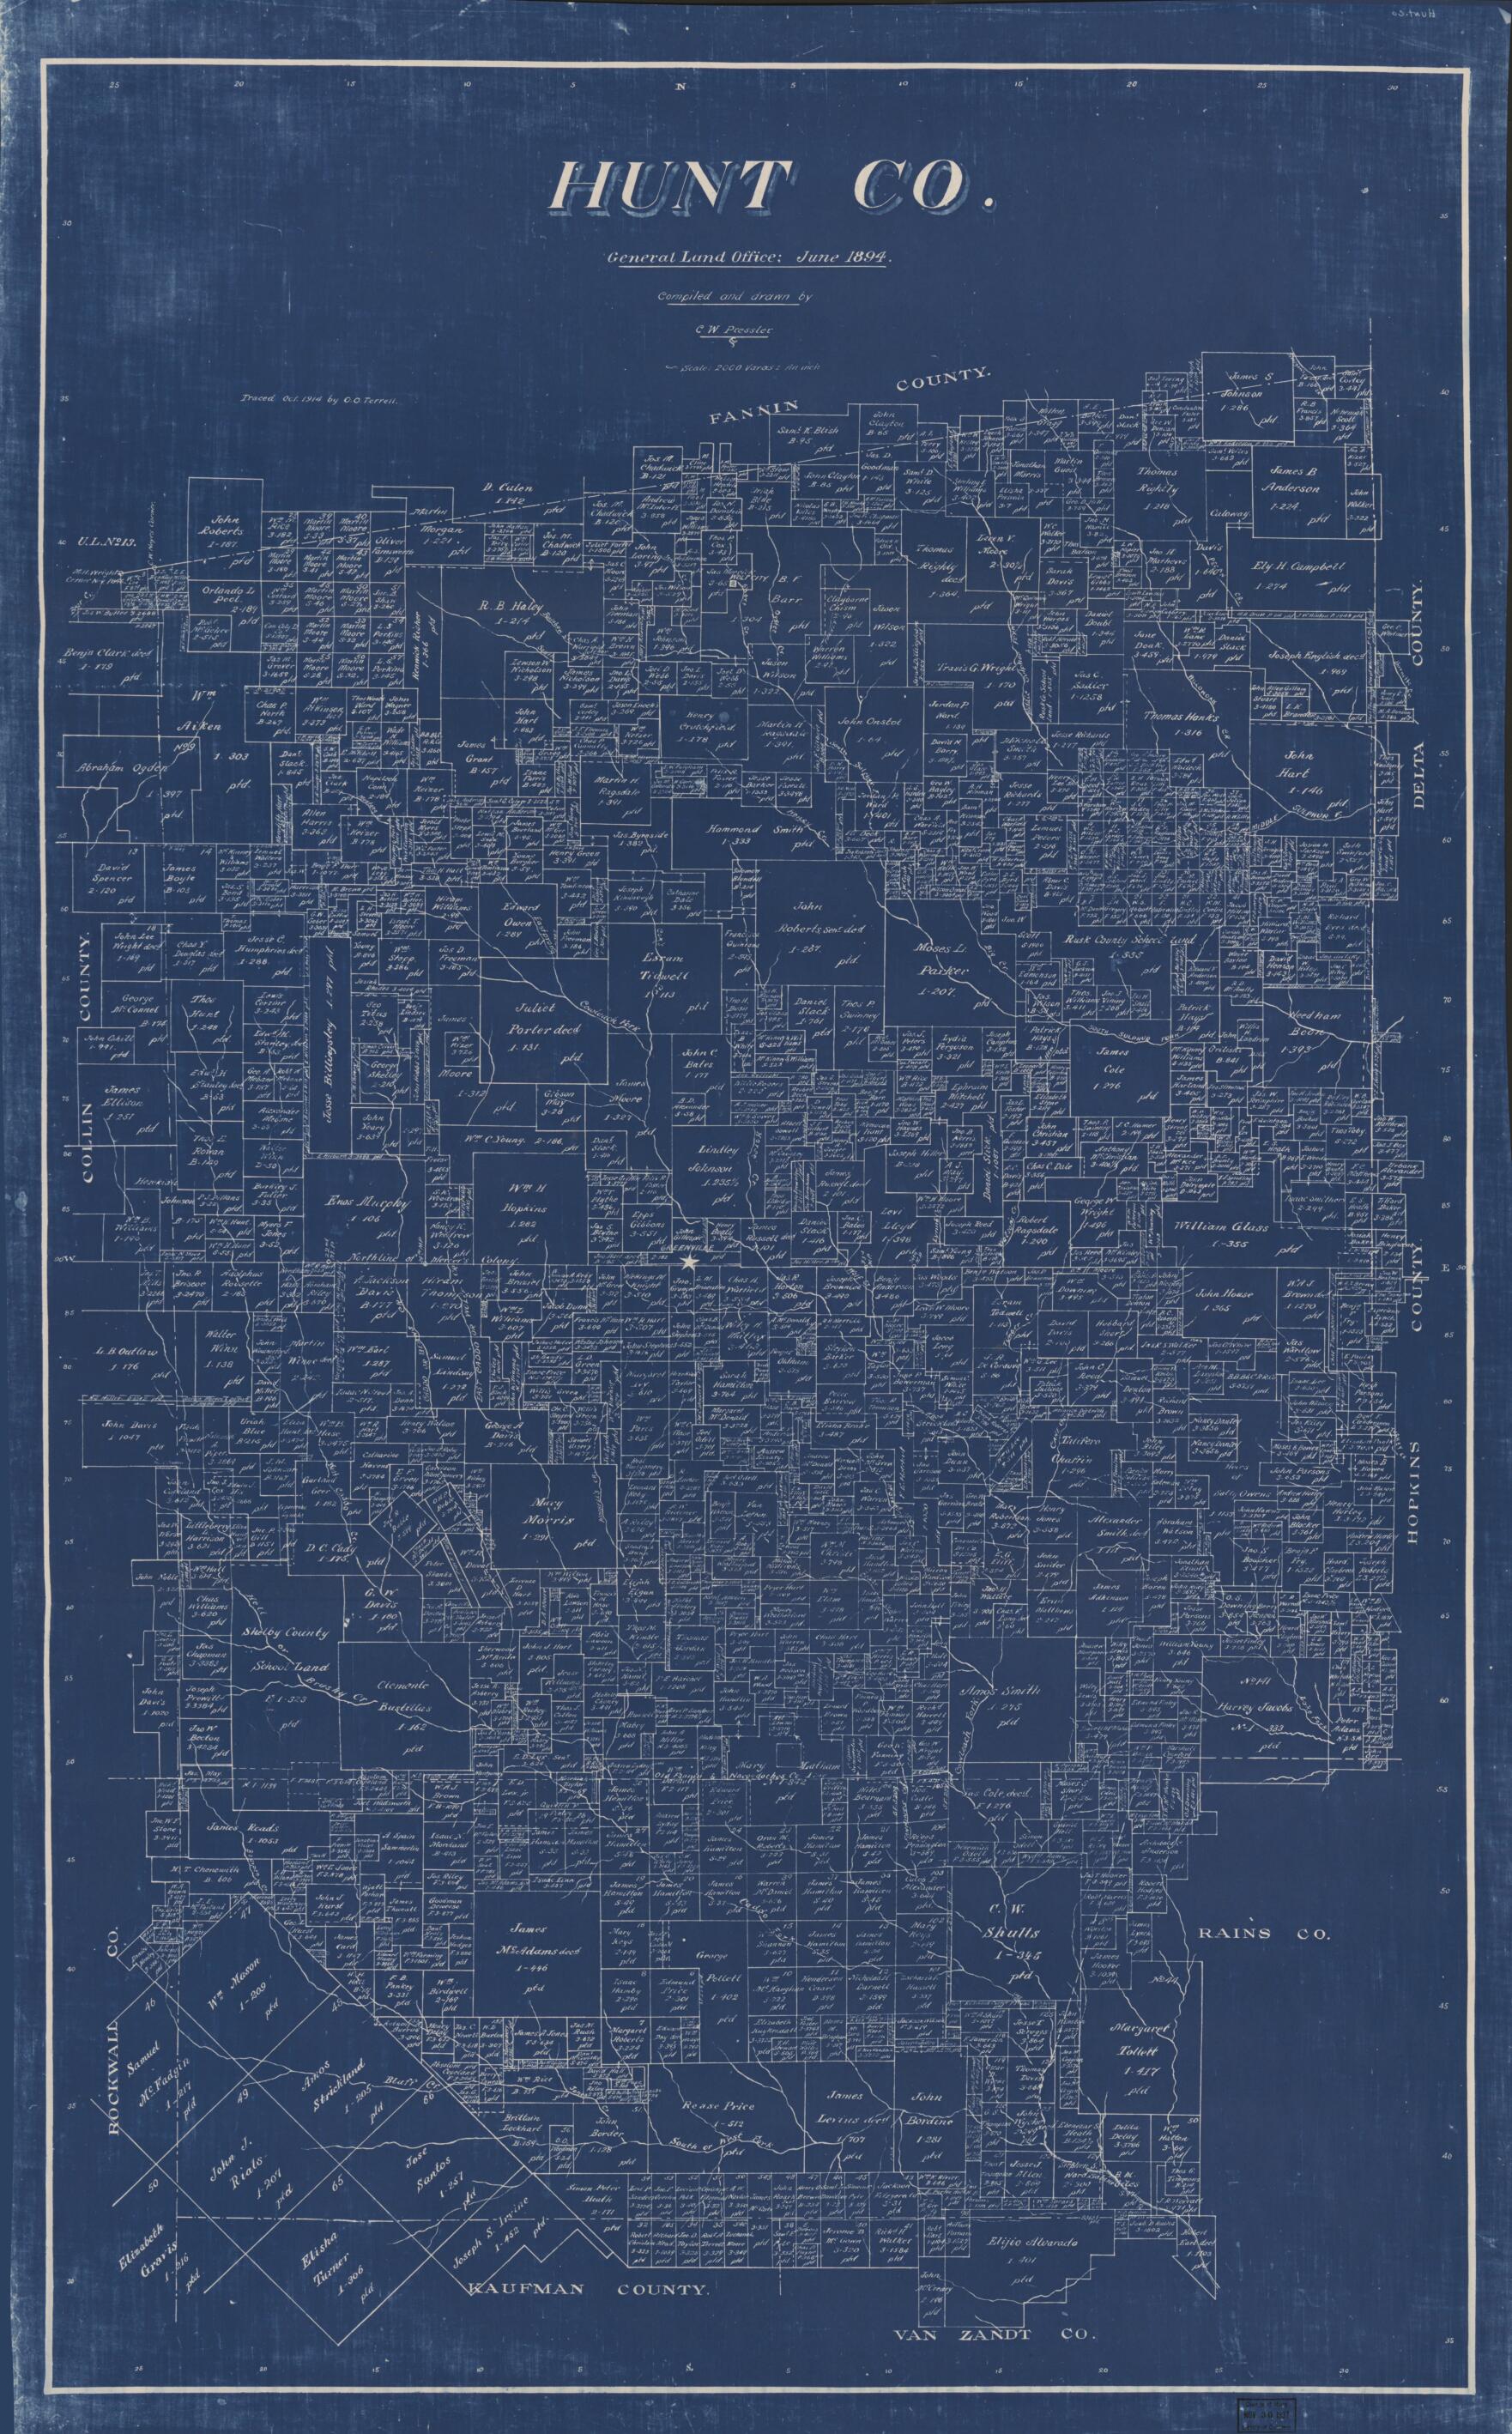 This old map of Hunt Co., Texas (Hunt County, Texas) from 1894 was created by Chas. W. Pressler,  Texas. General Land Office in 1894